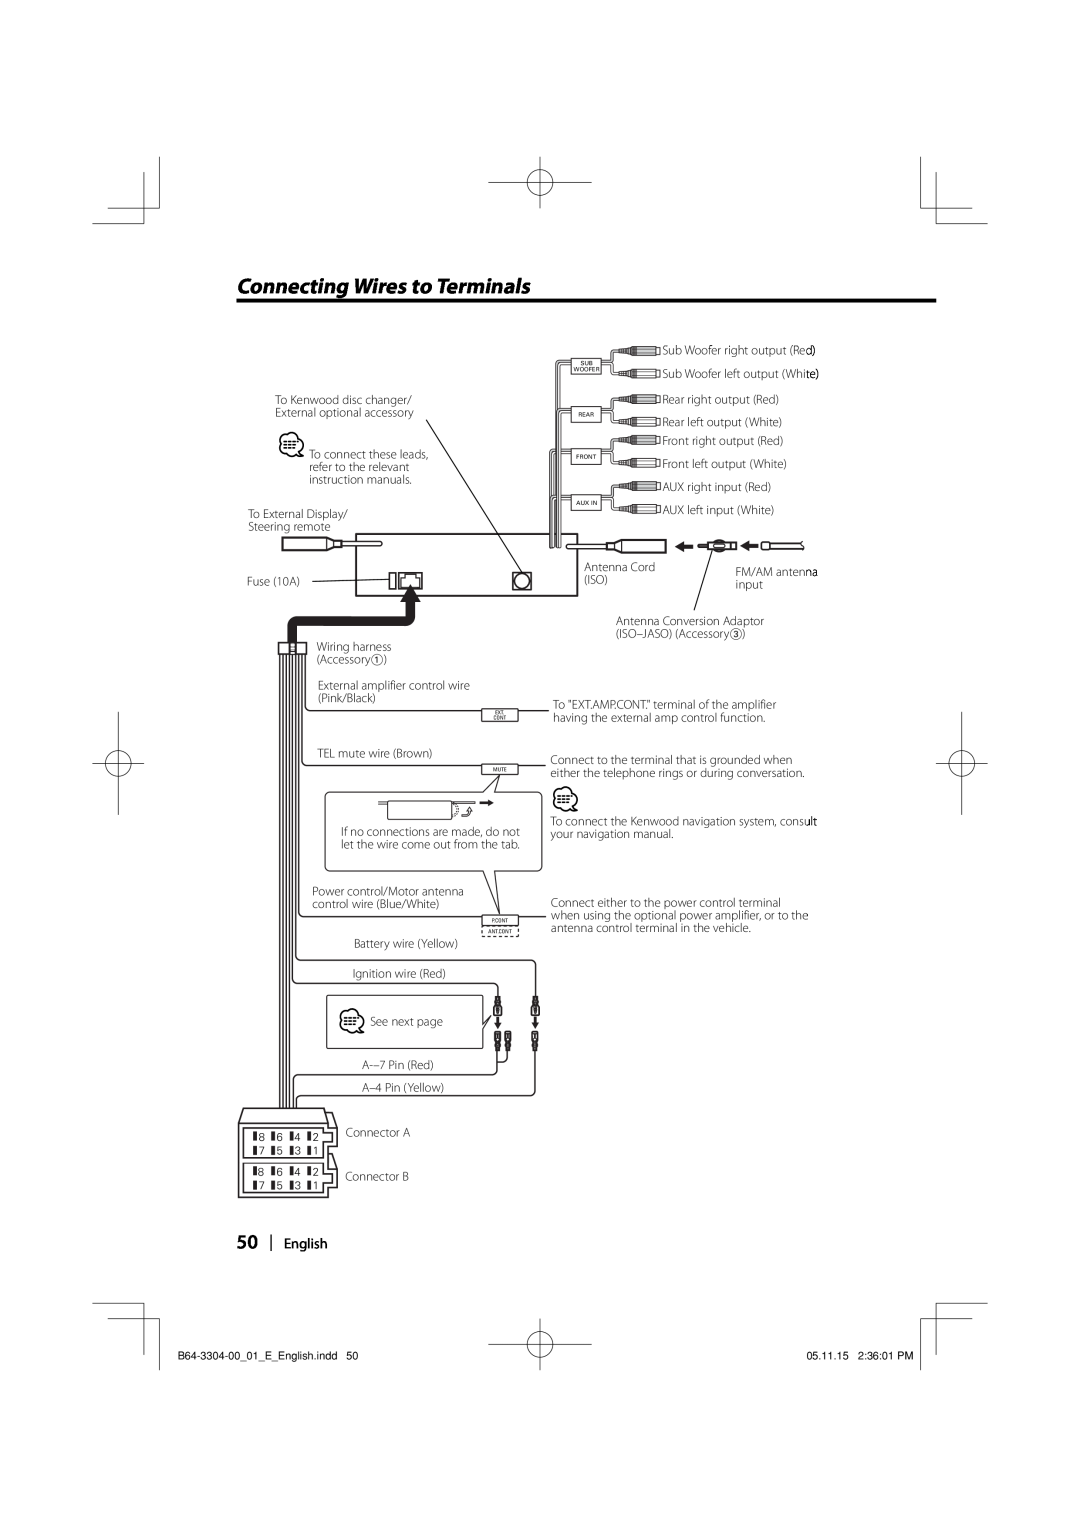 Dolby Laboratories KDC-W8534 instruction manual Connecting Wires to Terminals, English 